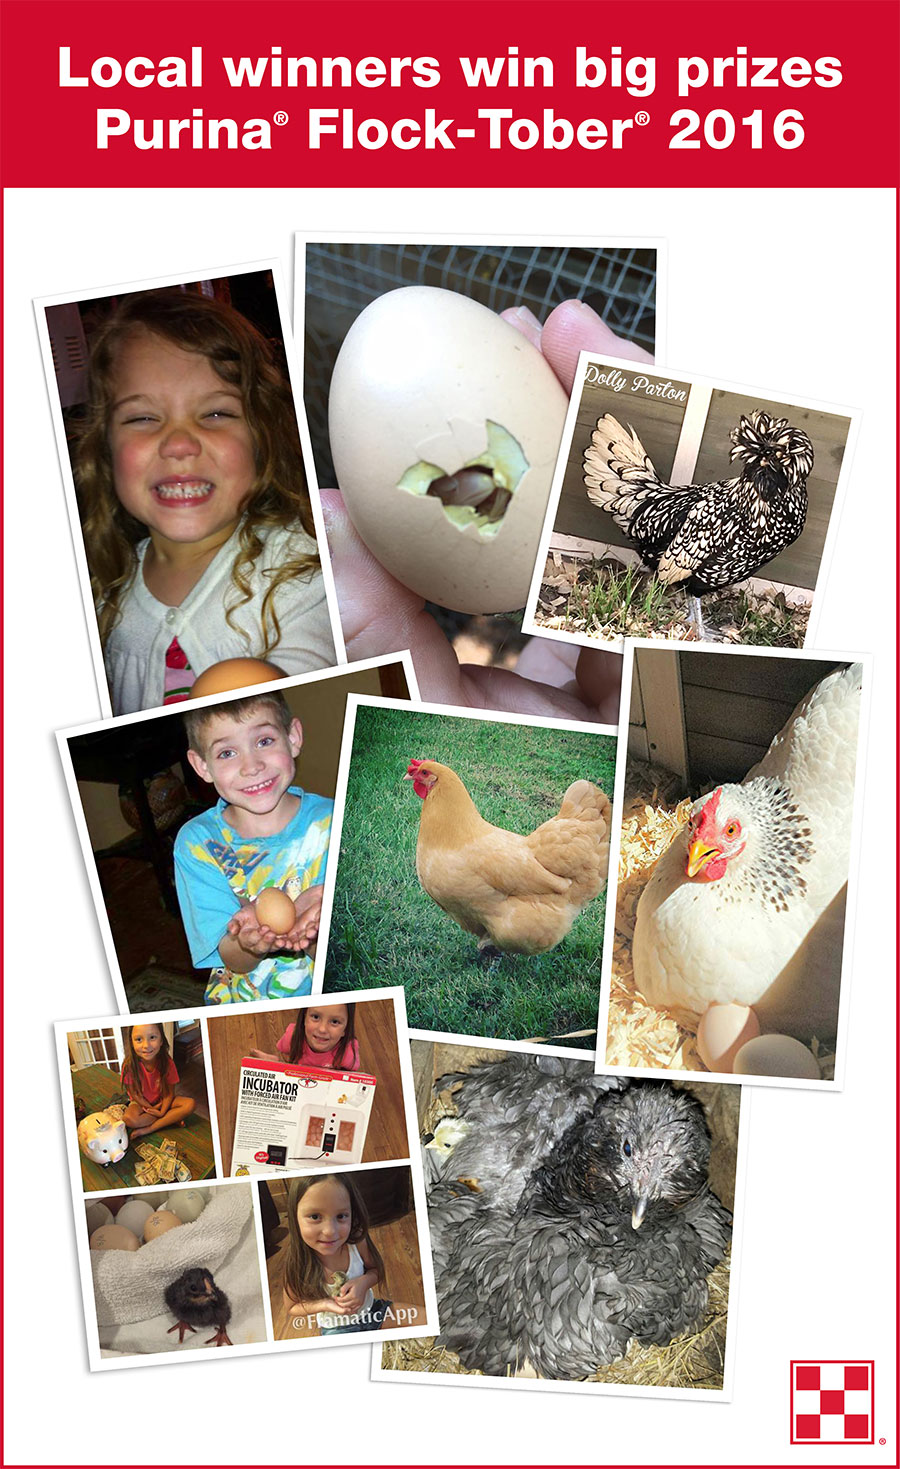 Communities rally to celebrate uplifting stories, hens with personality.